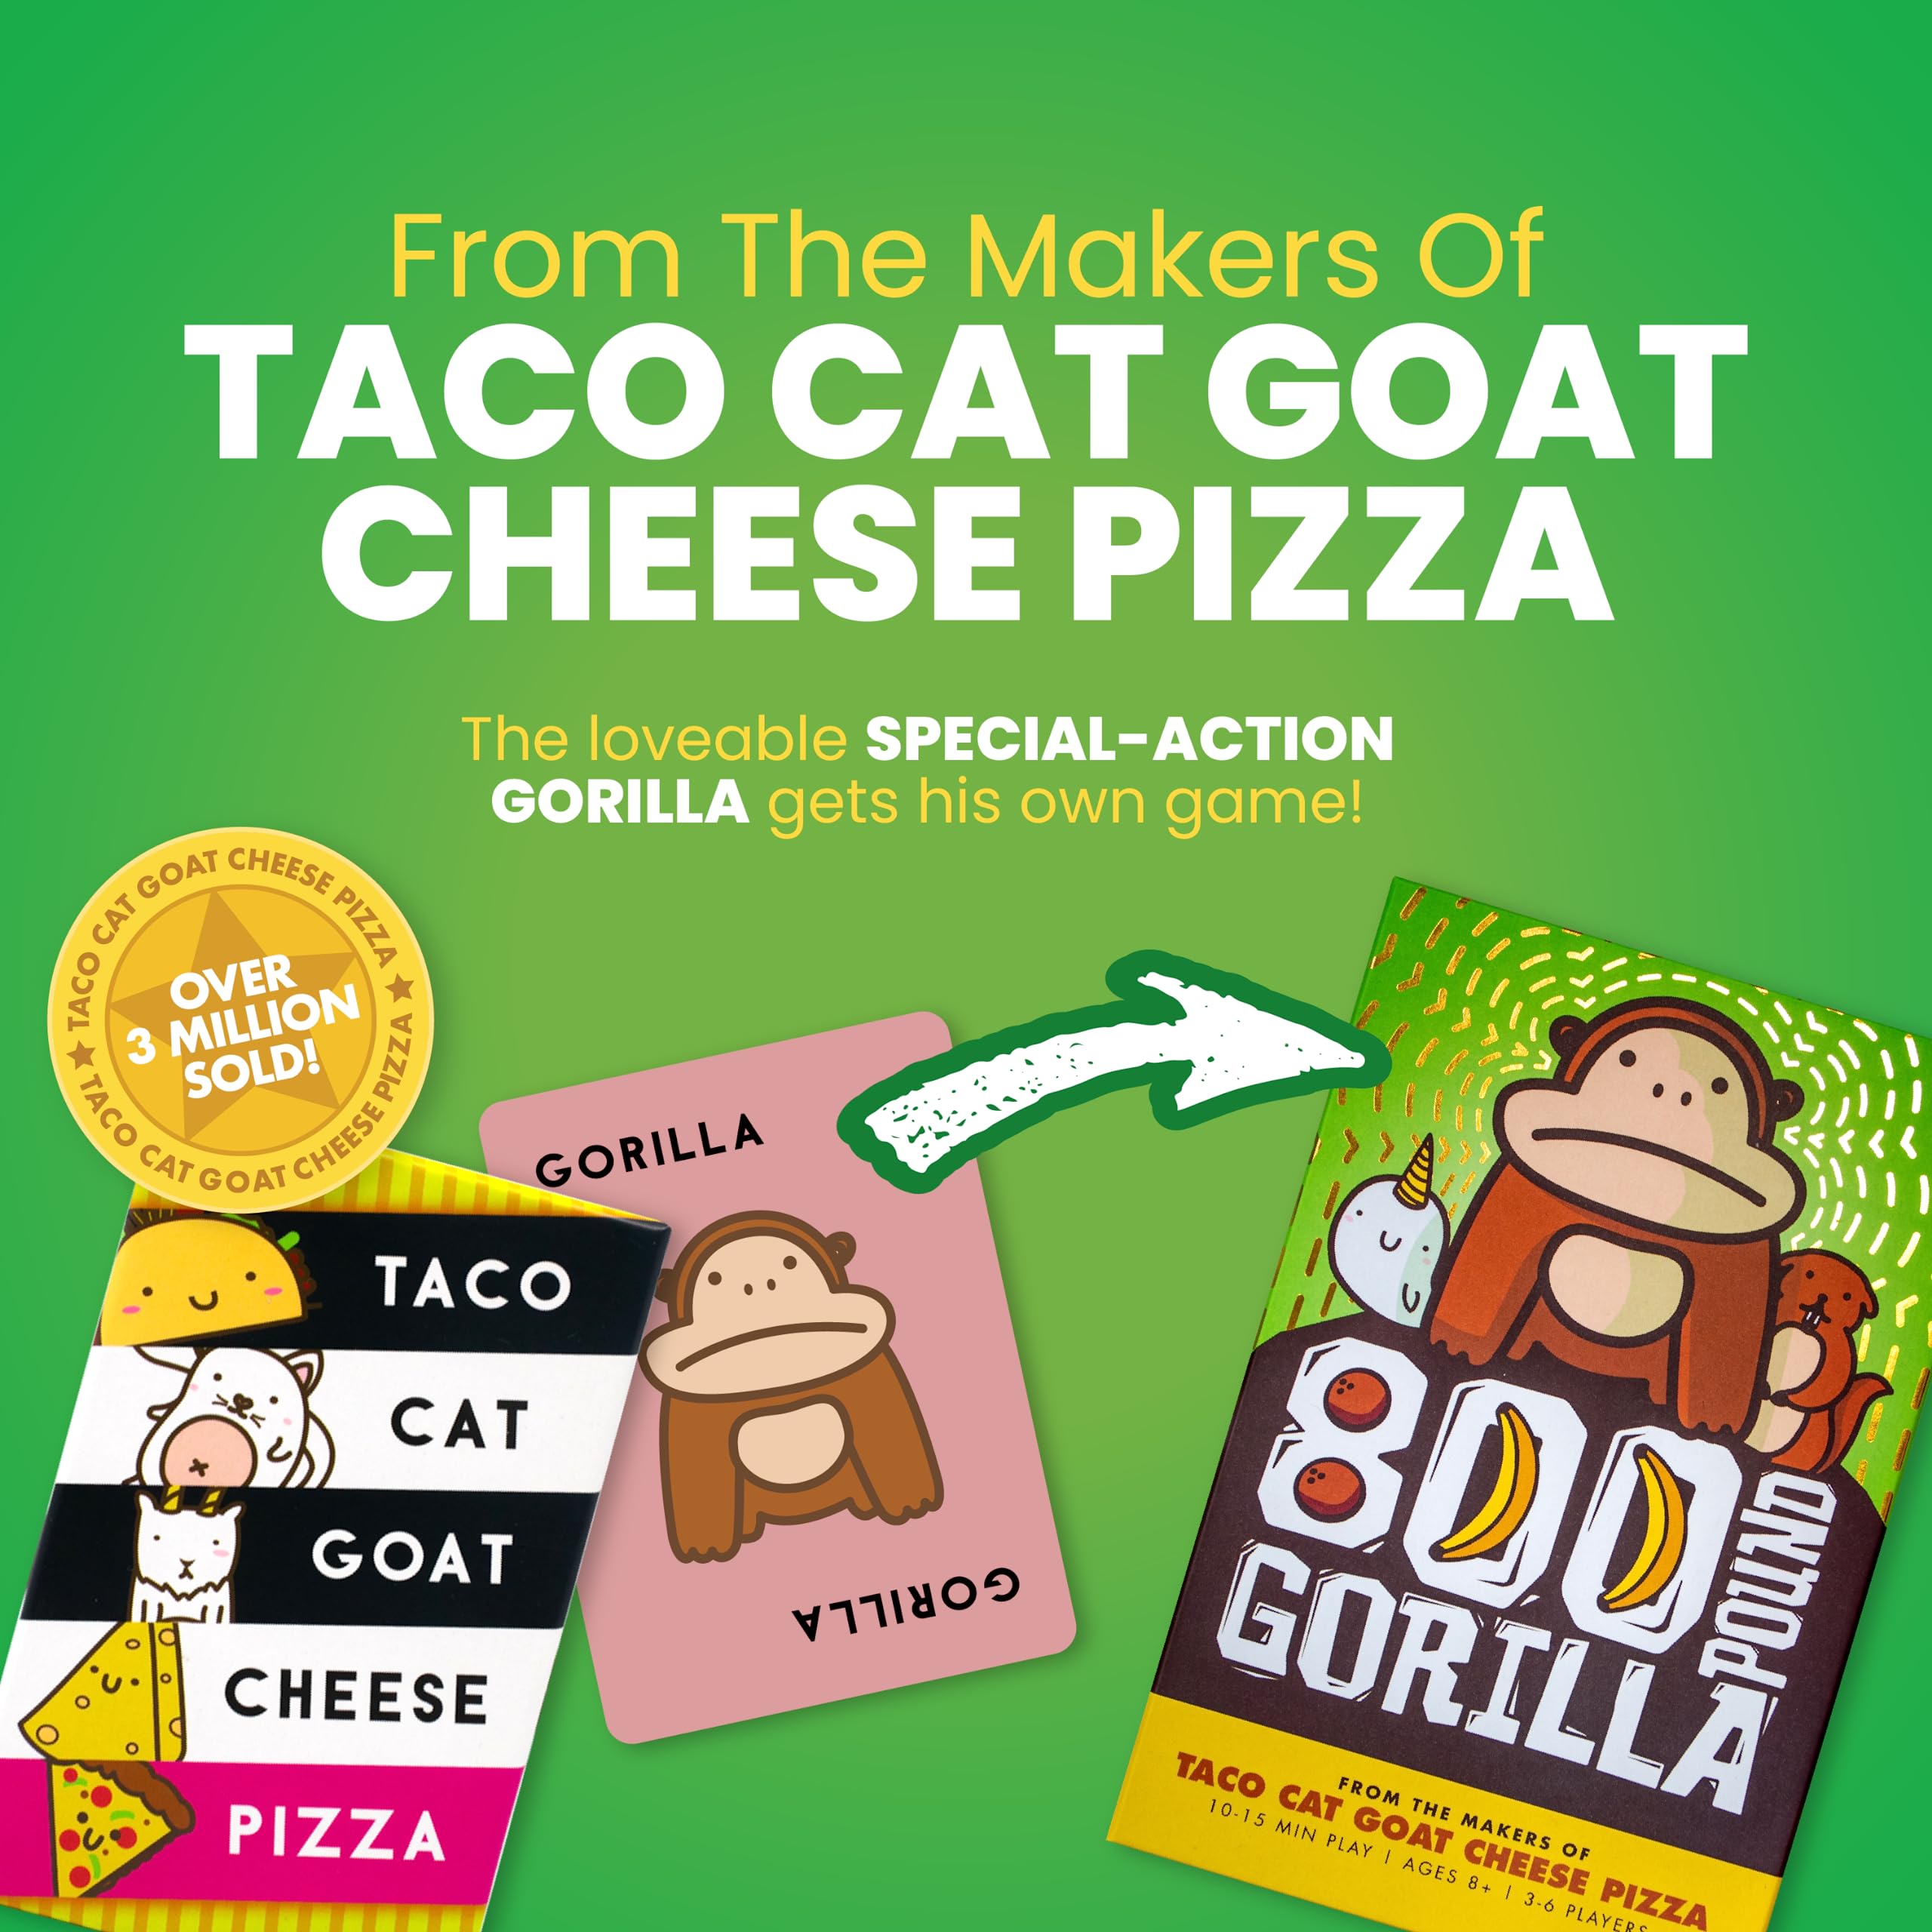 800 Pound Gorilla – by Taco Cat Goat Cheese Pizza - Fun Family Card Game for Kids and Adults – Great for Family Game Night, Vacation, Birthday Gift for Kids Ages 8+ - Easy, 15 min, 3-6 Players